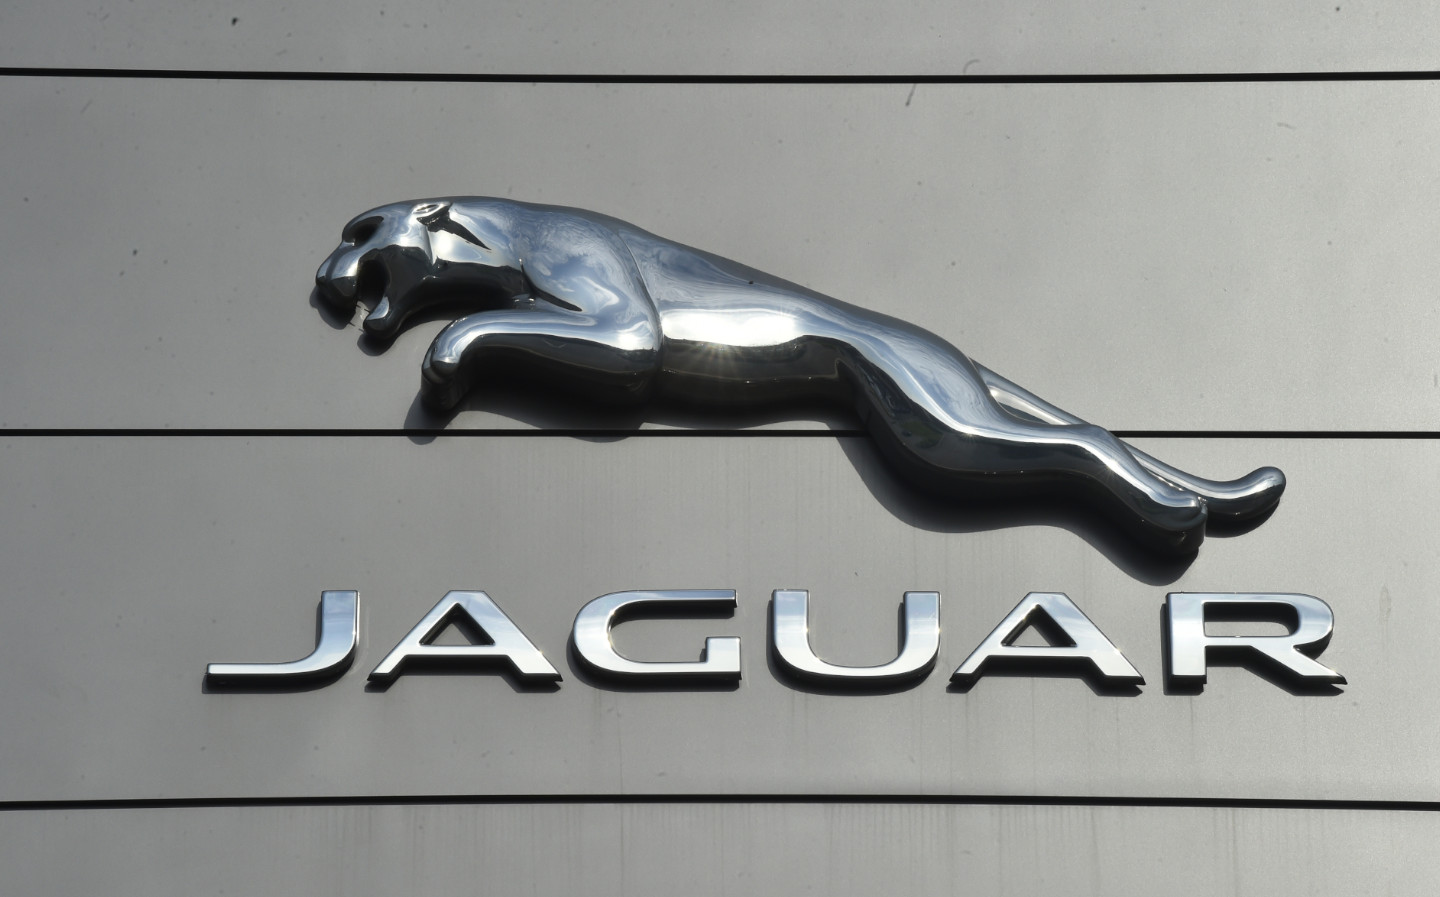 Jaguar J-Pace will be all-electric, Tesla Model X-rivalling SUV